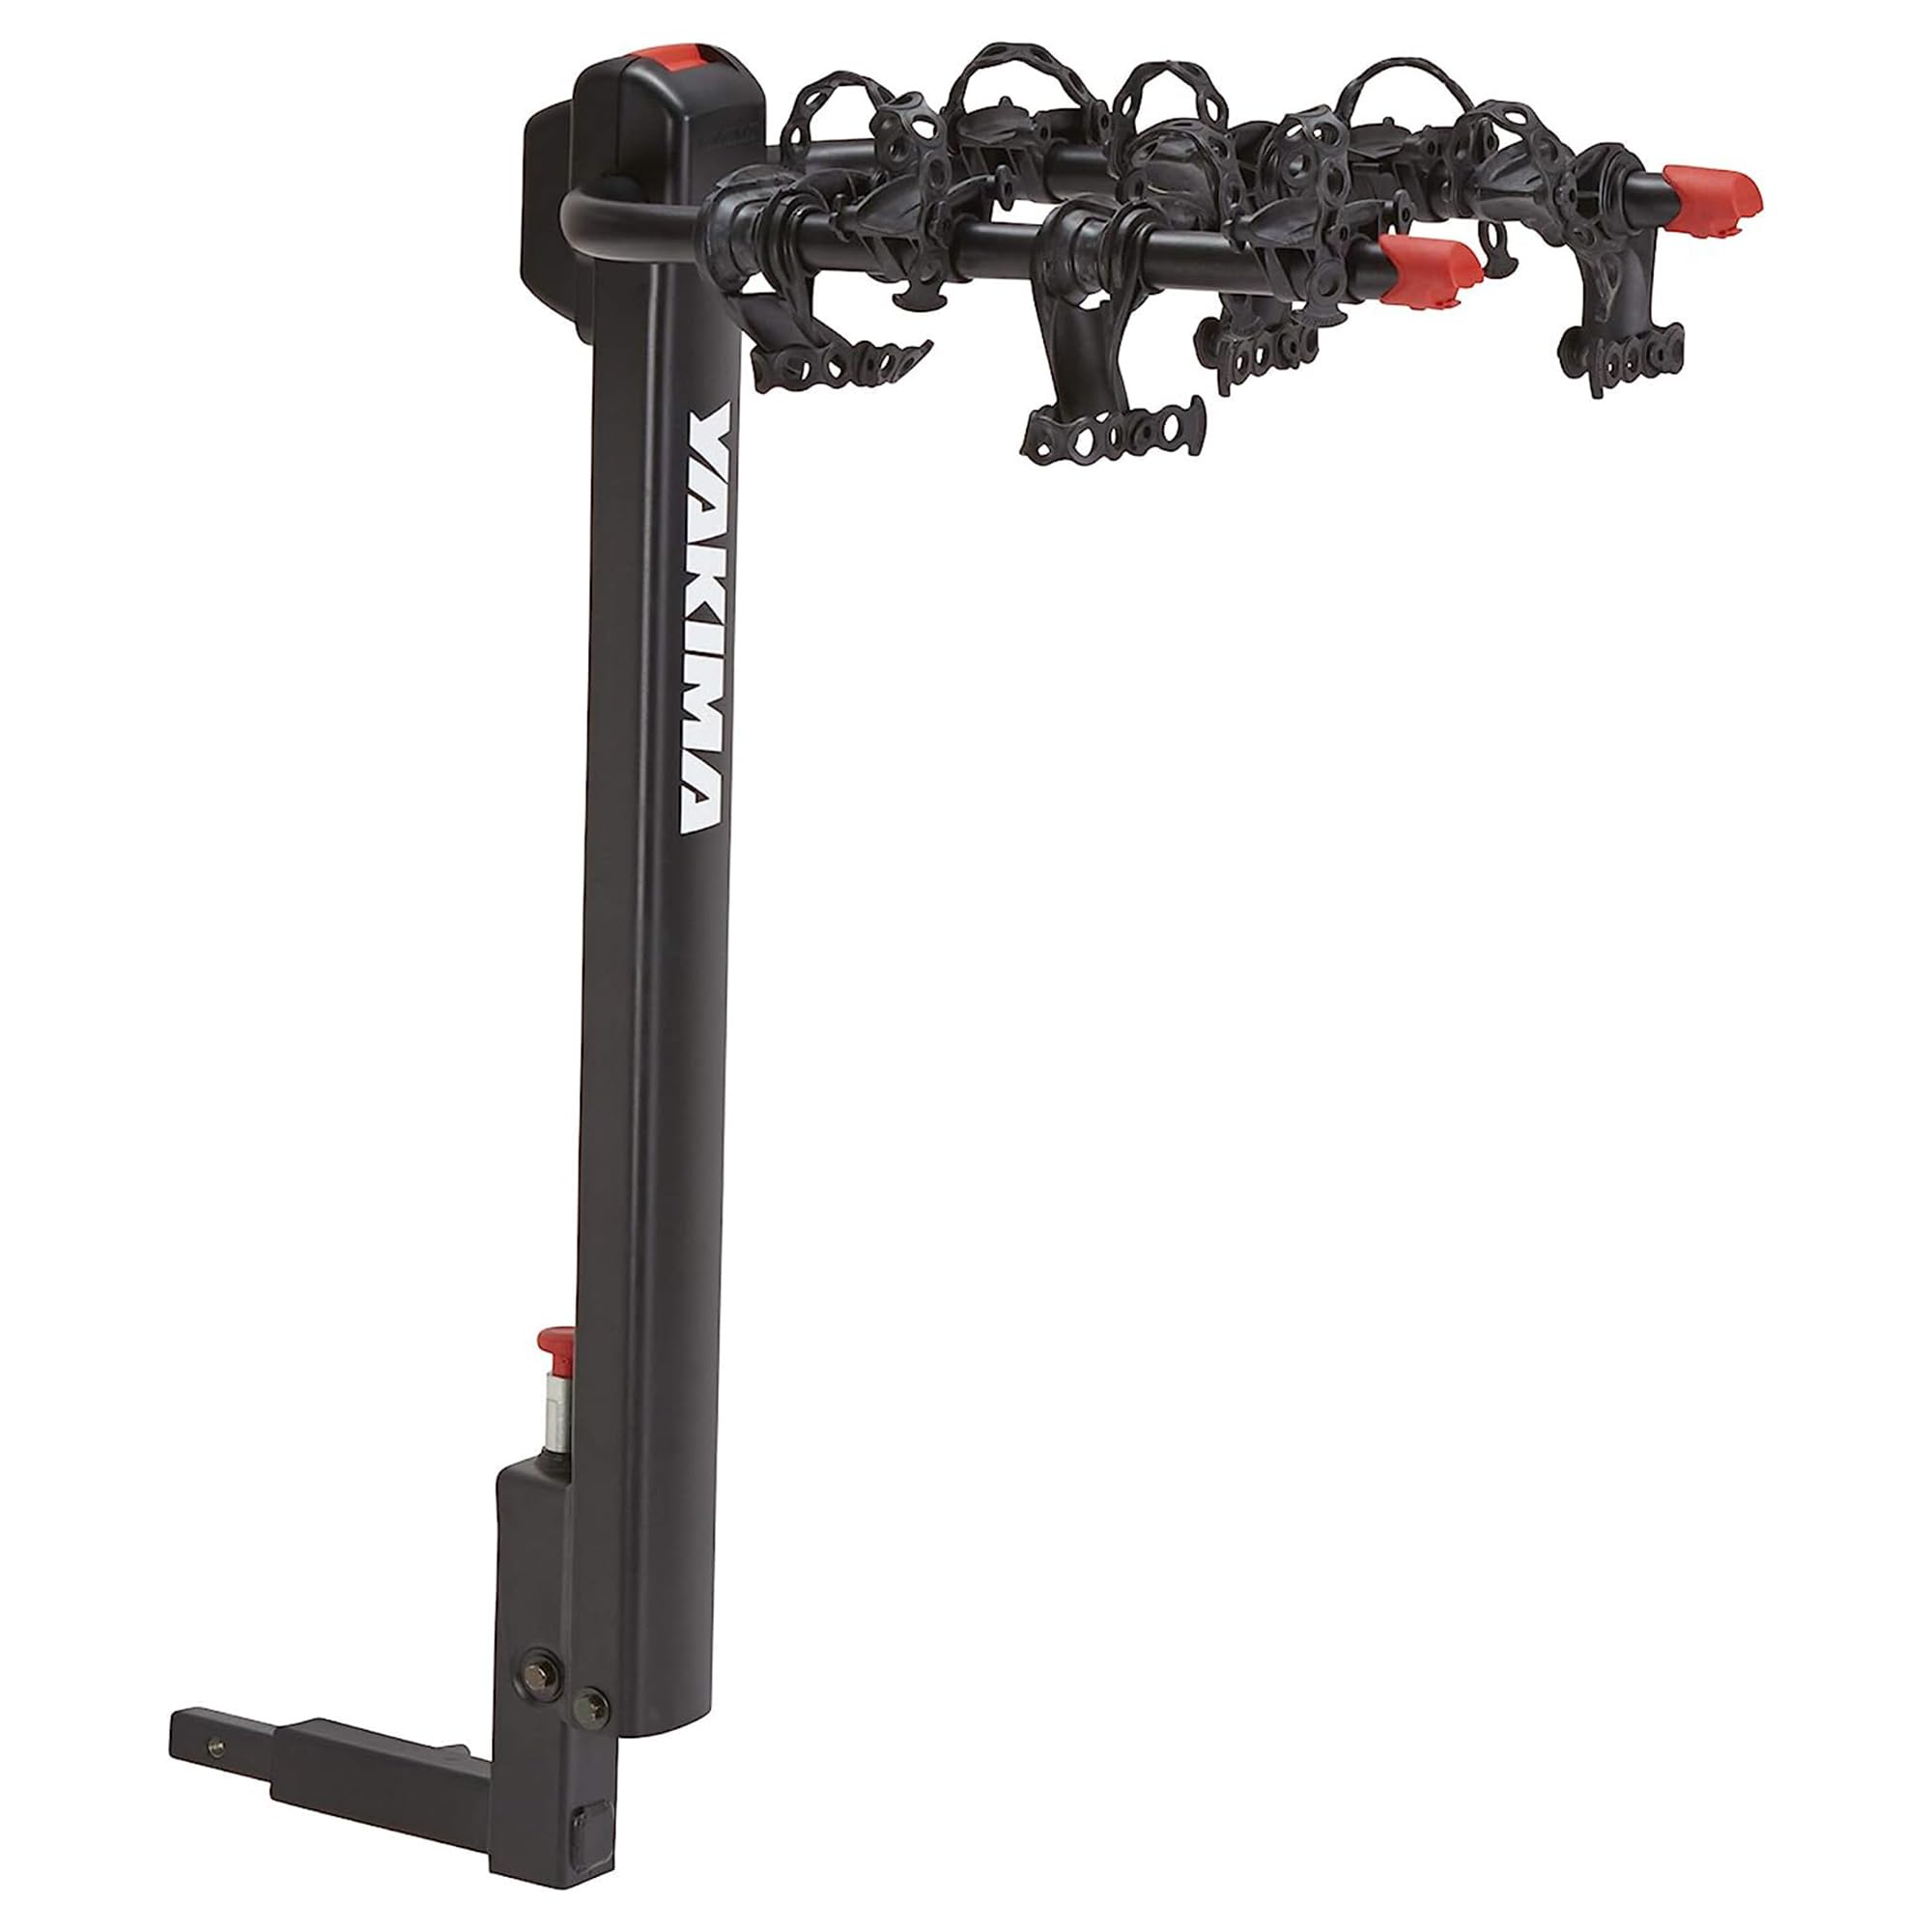 Yakima DoubleDown 4 Tilting Aluminum Hitch Bike Rack for Car, SUV, and Truck with 1.25 or 2 Inch Bike Rack Hitch Receivers, Black $25.99